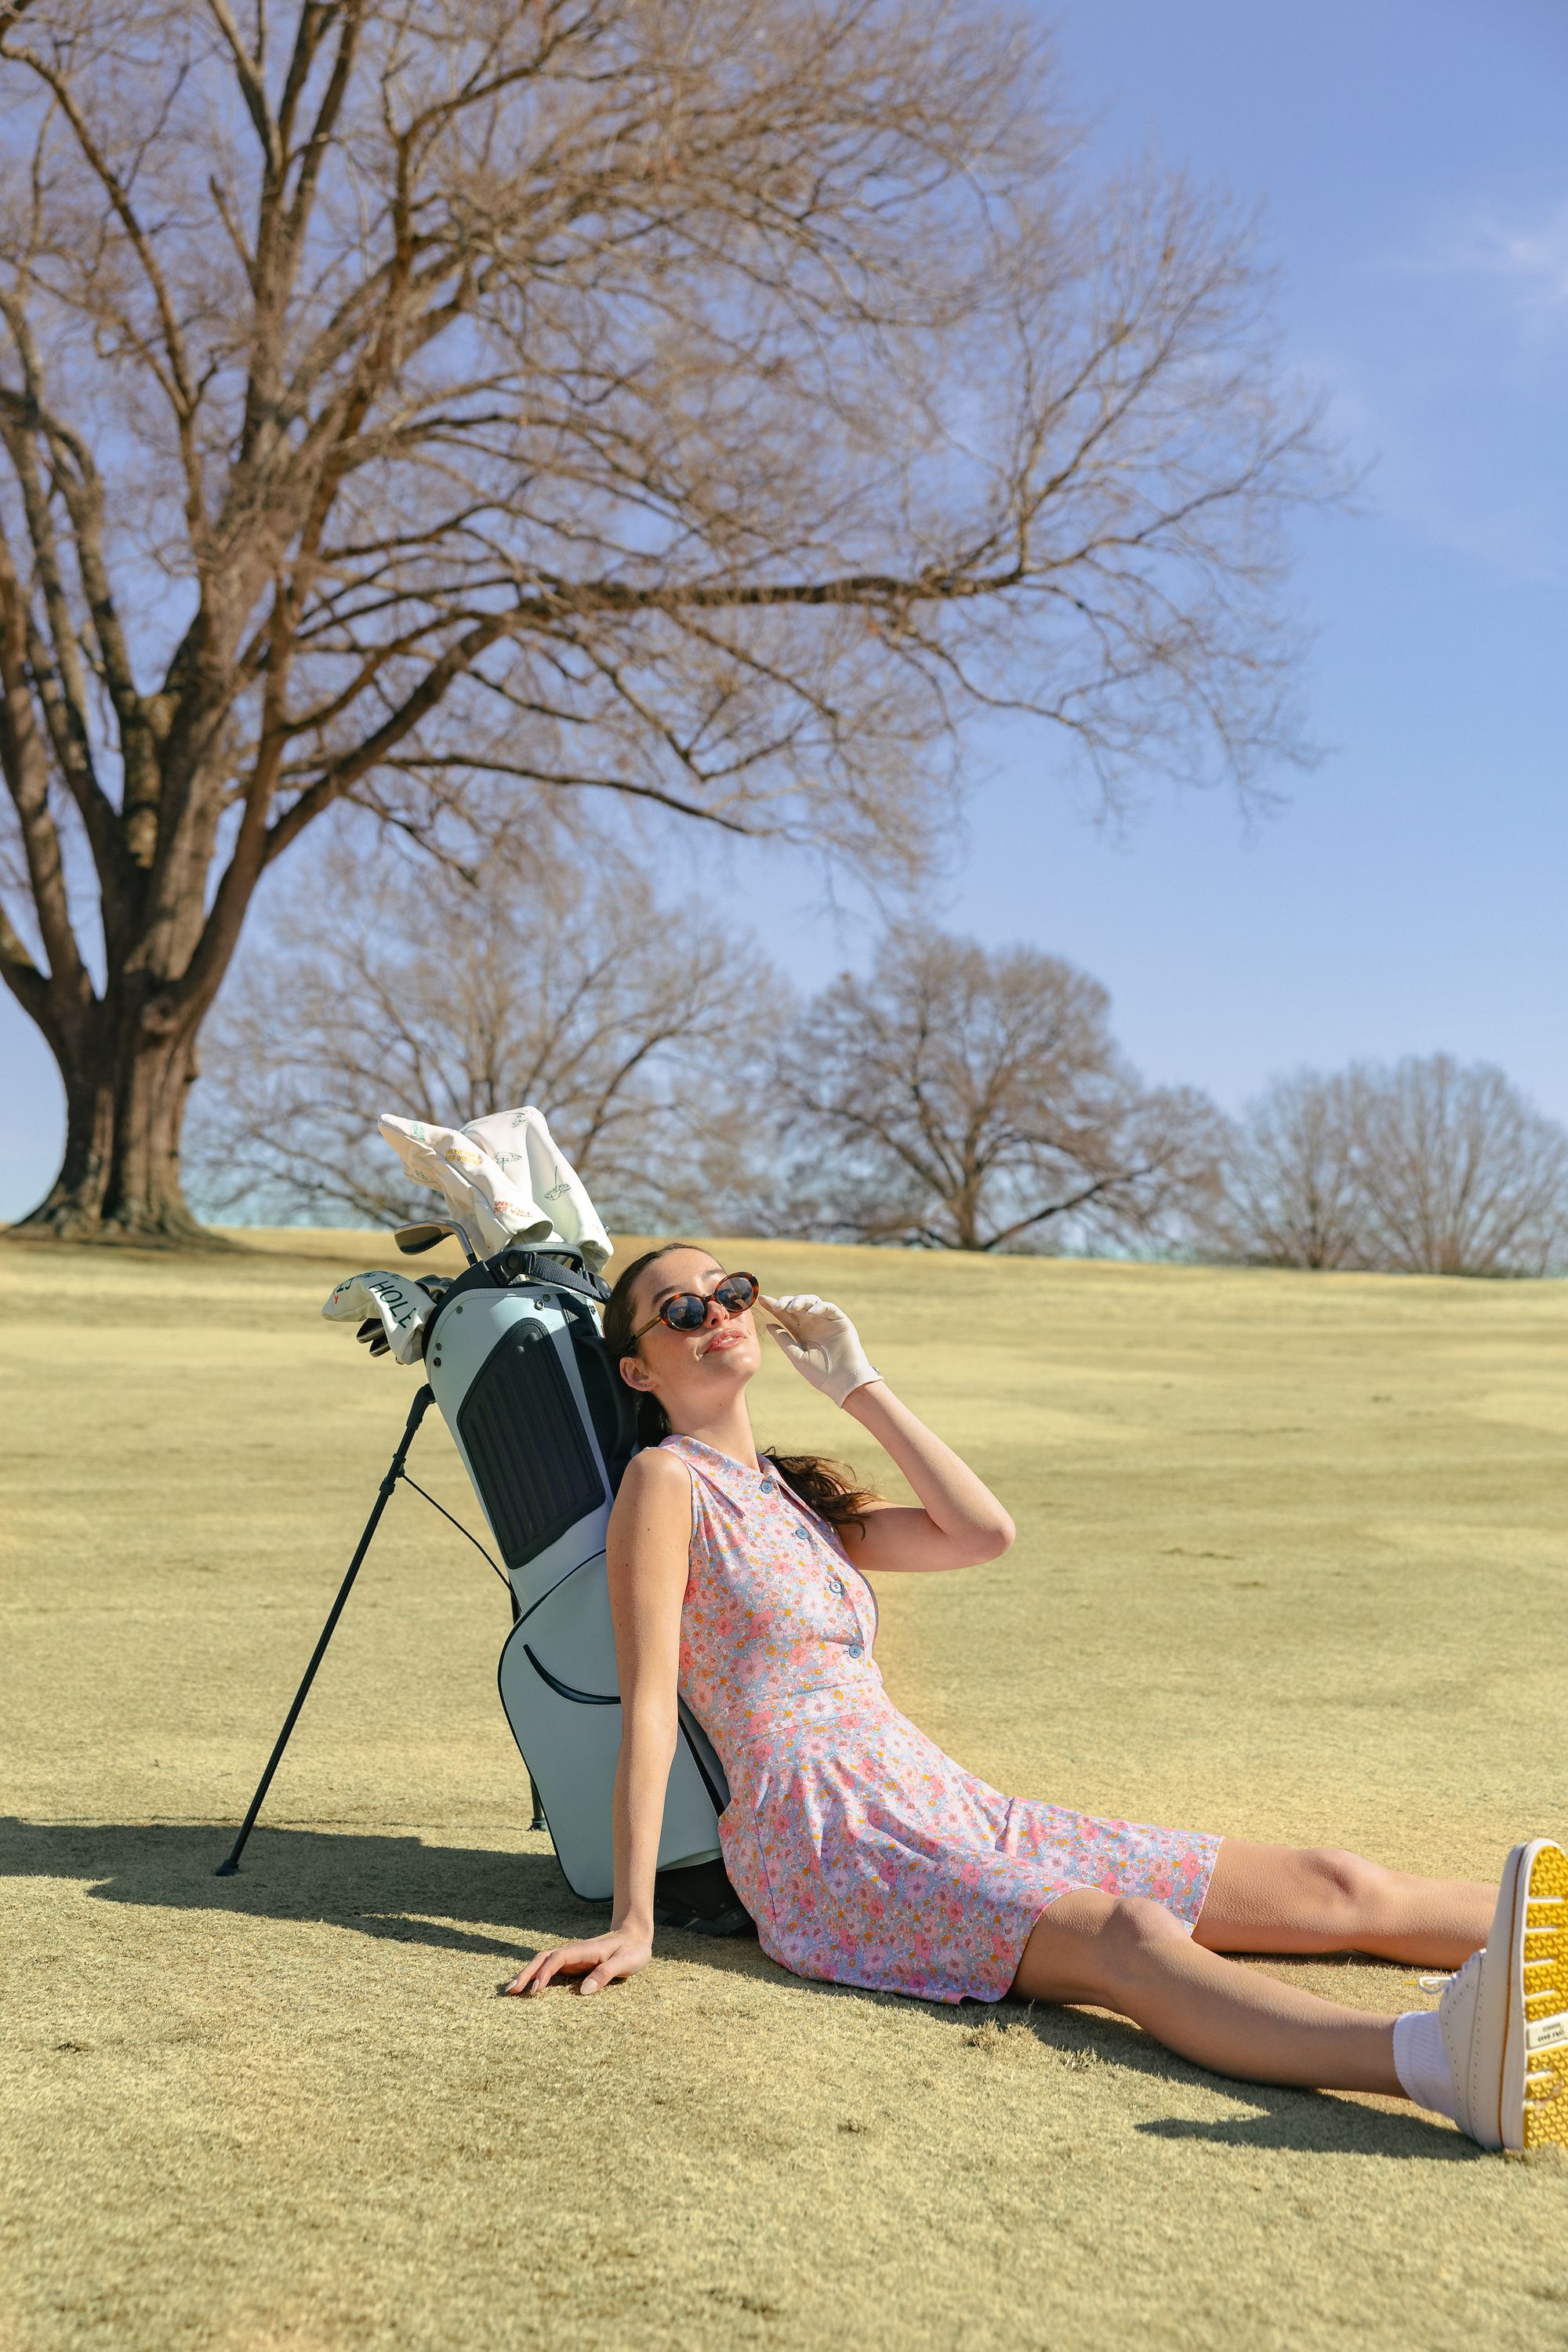 From khaki to pleated skorts, the evolution of women's golf fashion